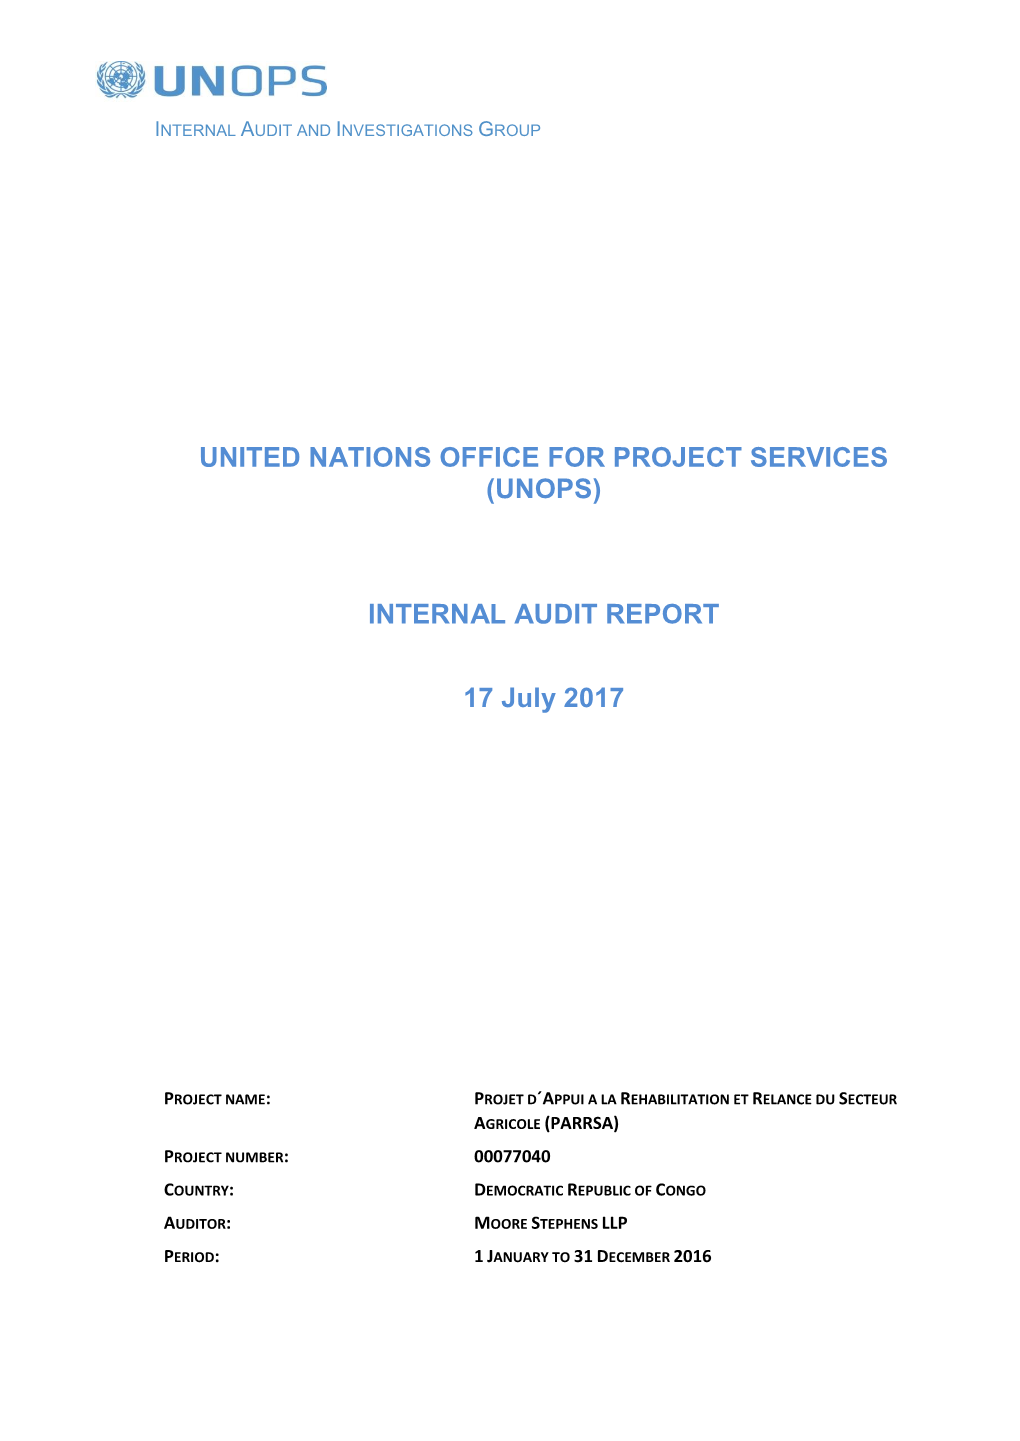 UNITED NATIONS OFFICE for PROJECT SERVICES (UNOPS) INTERNAL AUDIT REPORT 17 July 2017